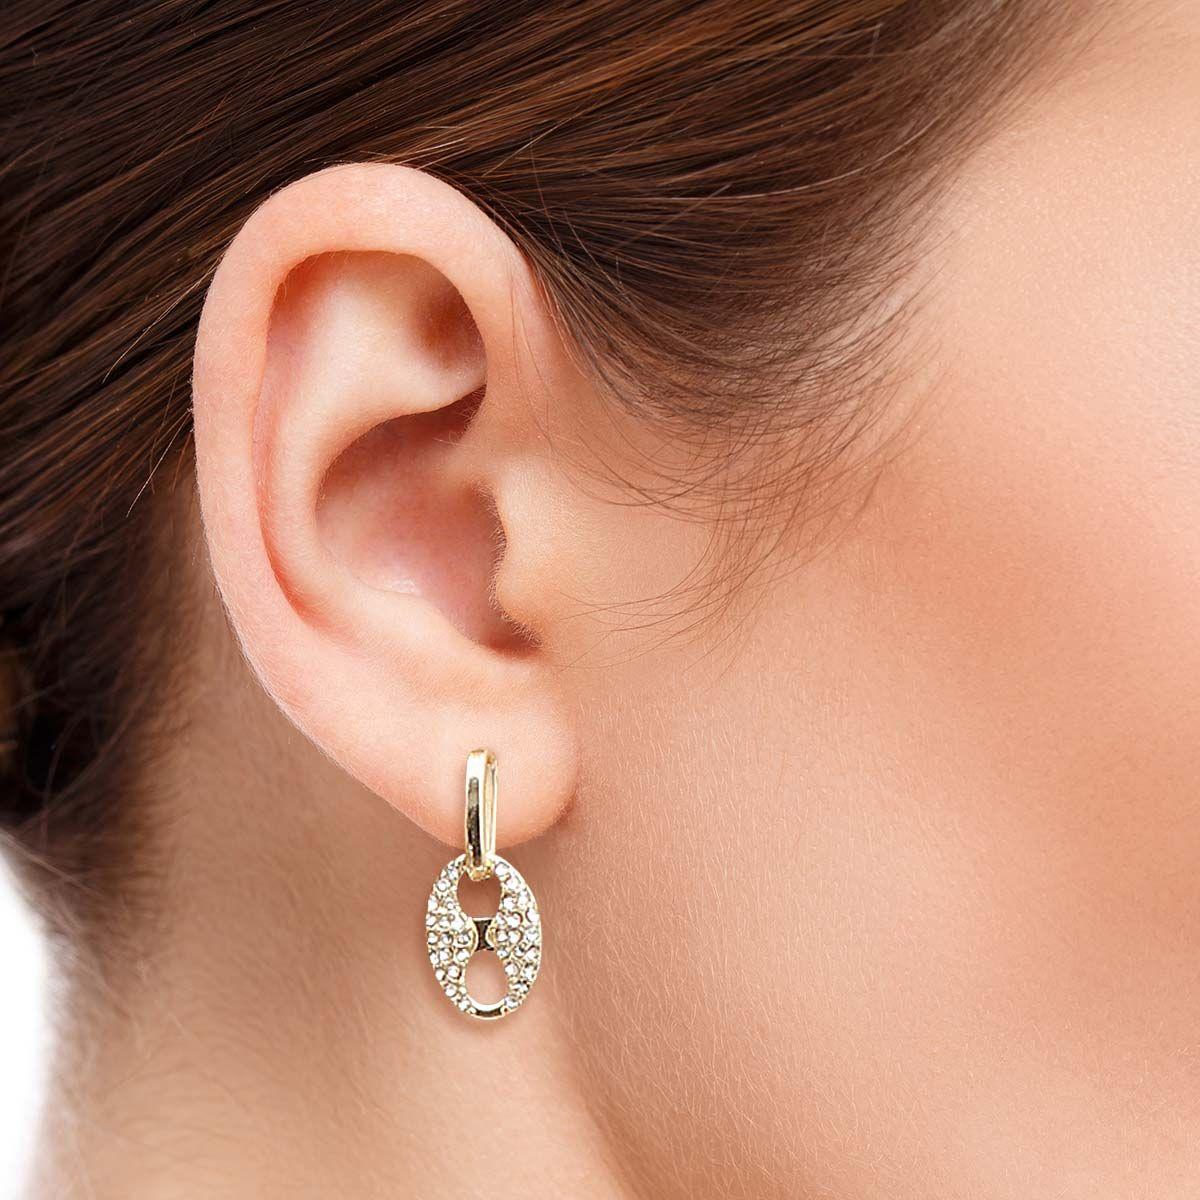 Stunning Gold Plated Matelot Earrings: Must-Have Fashion Accessory